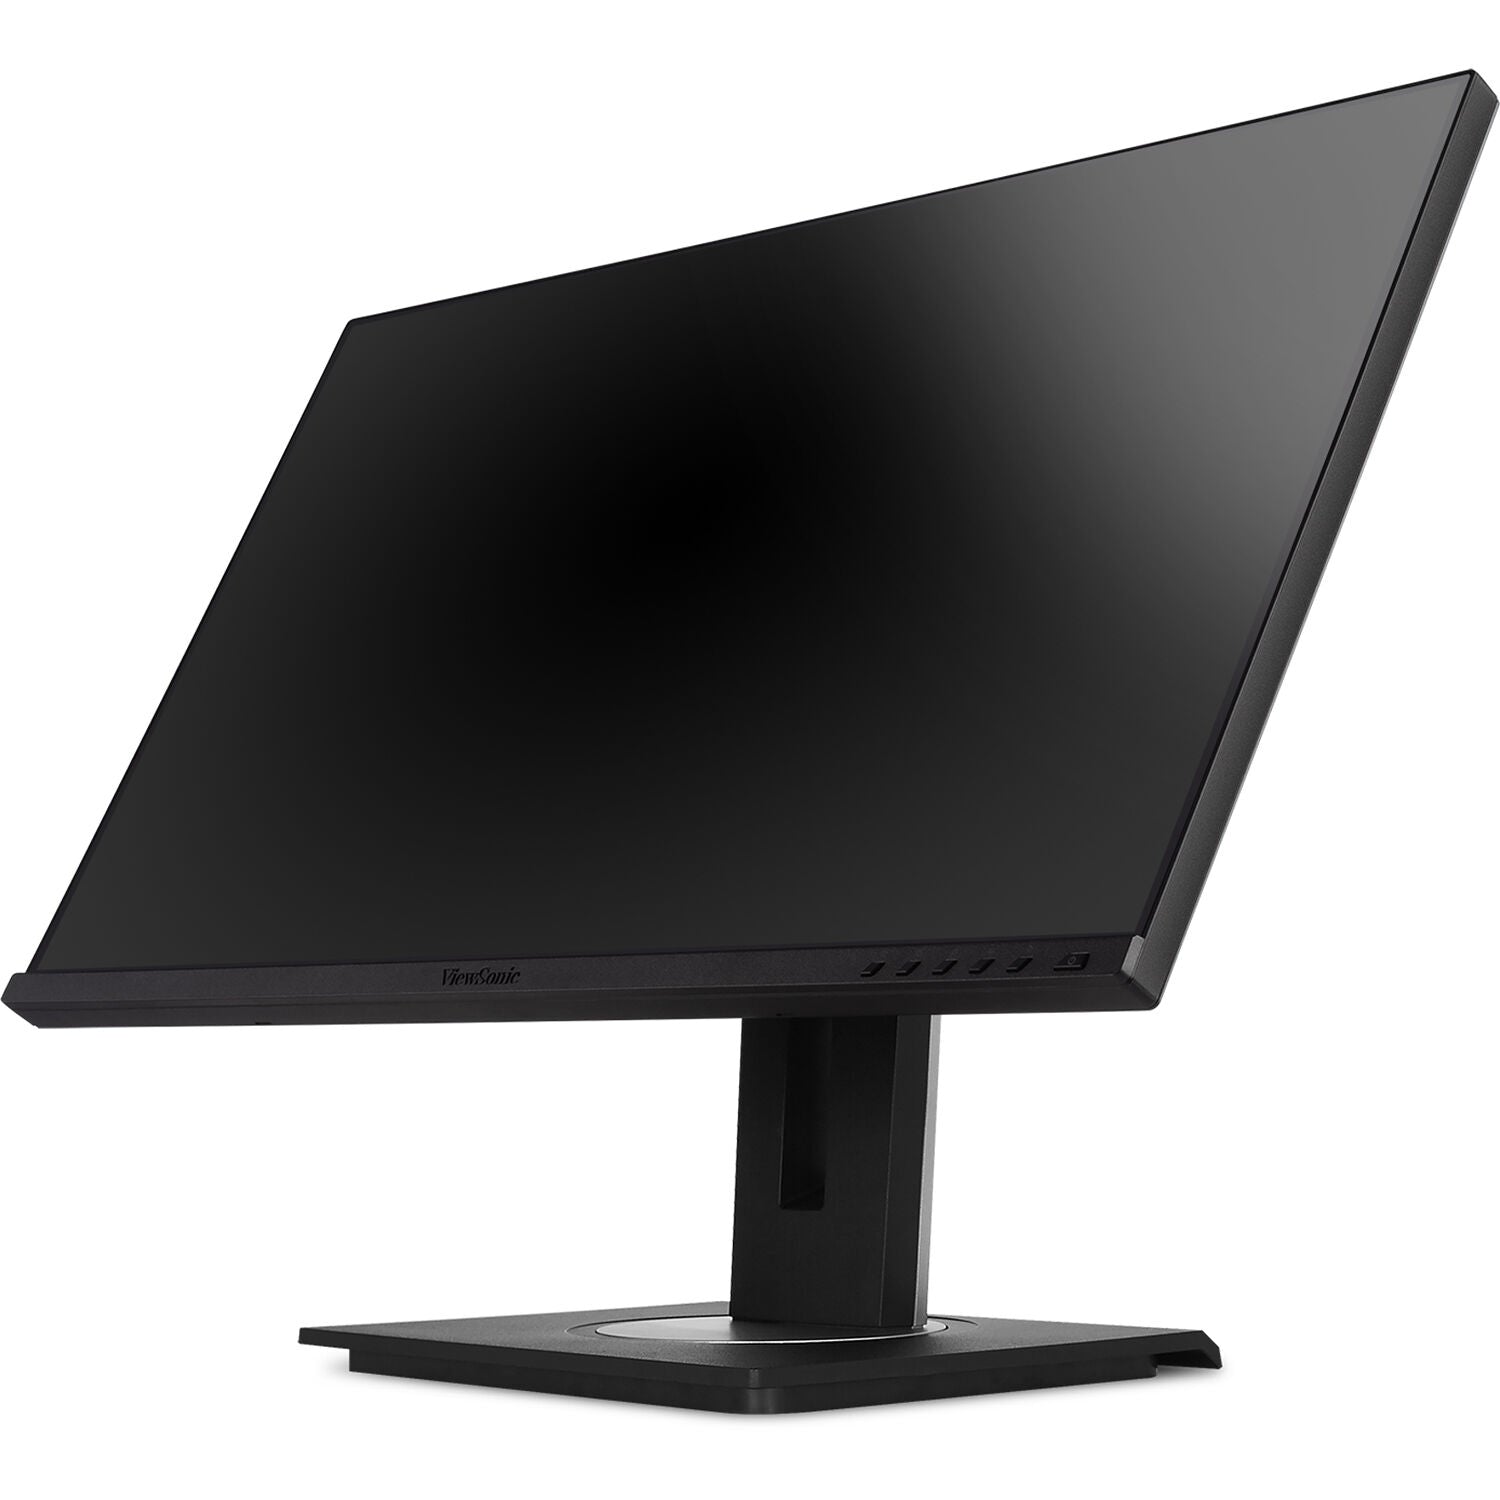 ViewSonic VG2448A-2-S 24" IPS Full HD Monitor - Certified Refurbished